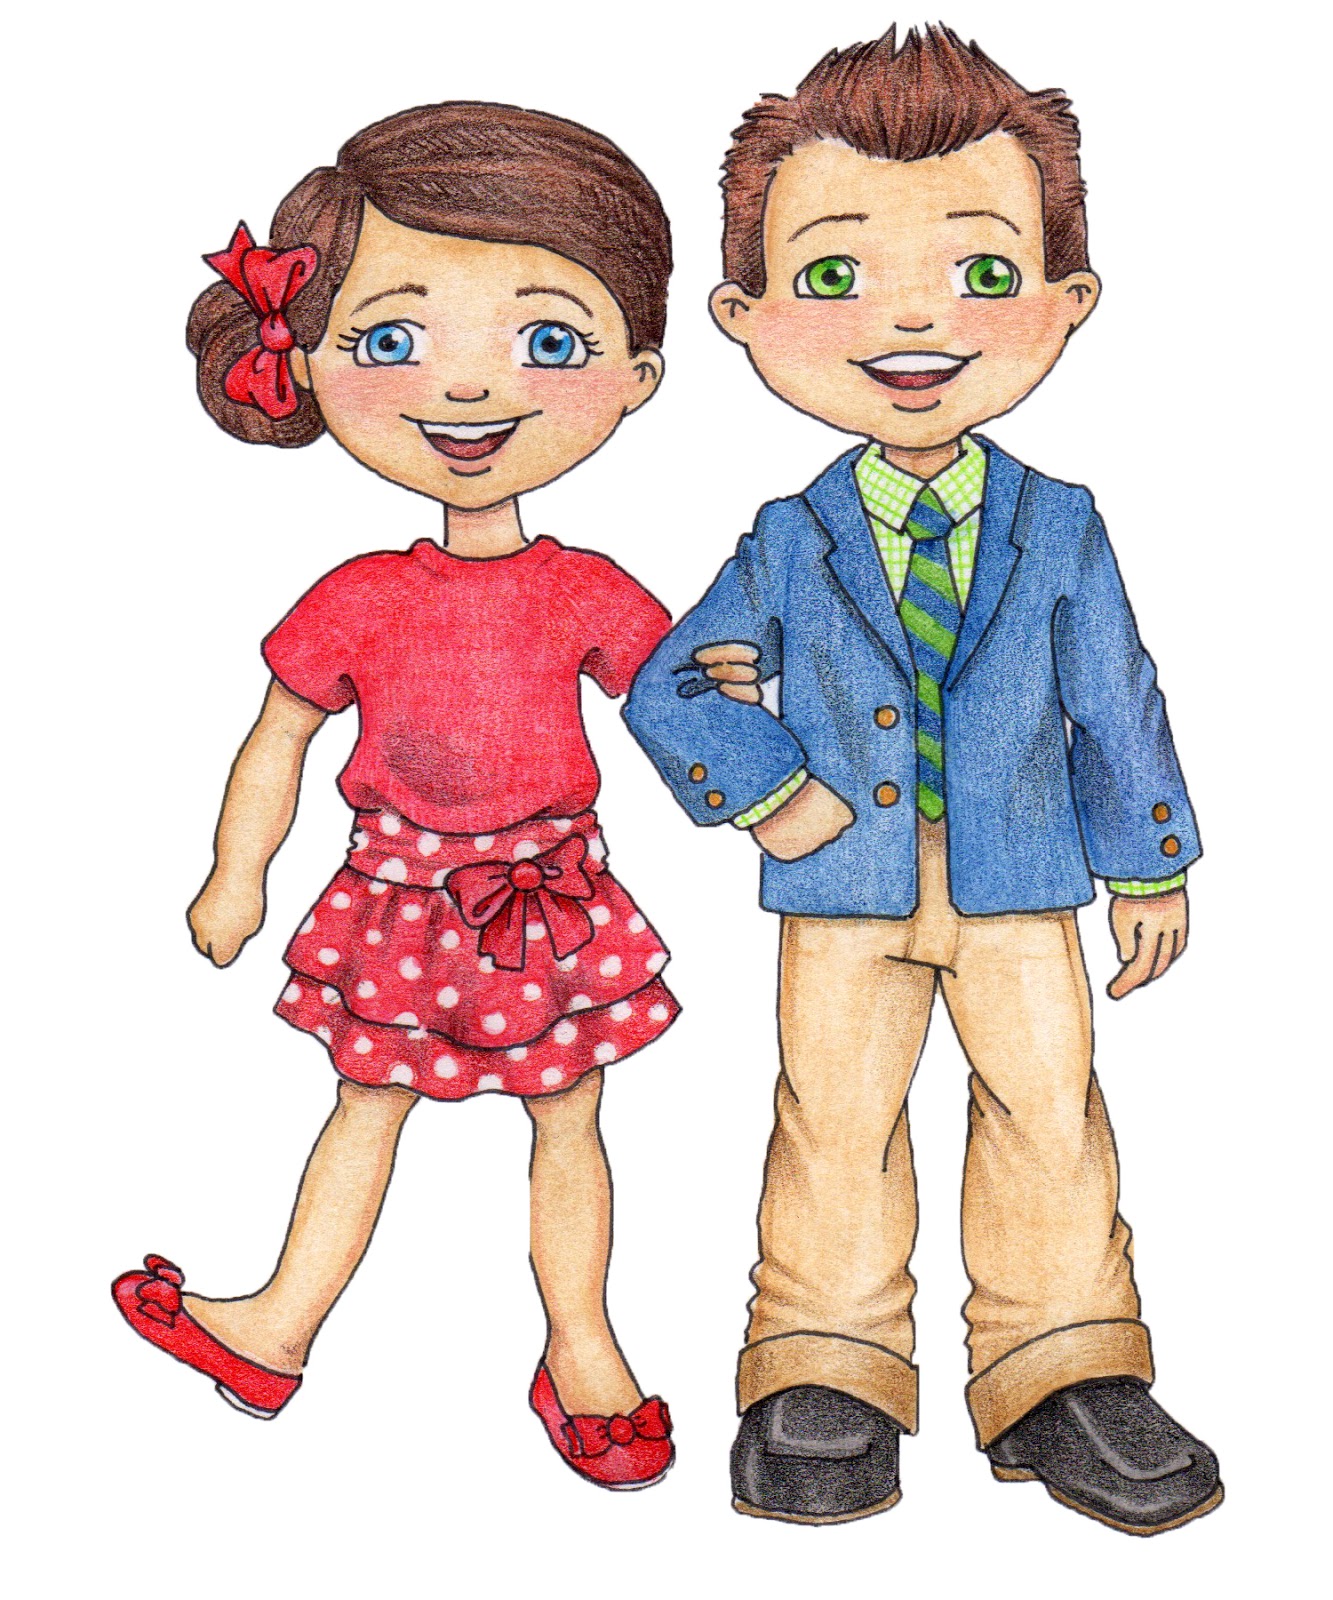 primary boy and girl clipart - photo #10